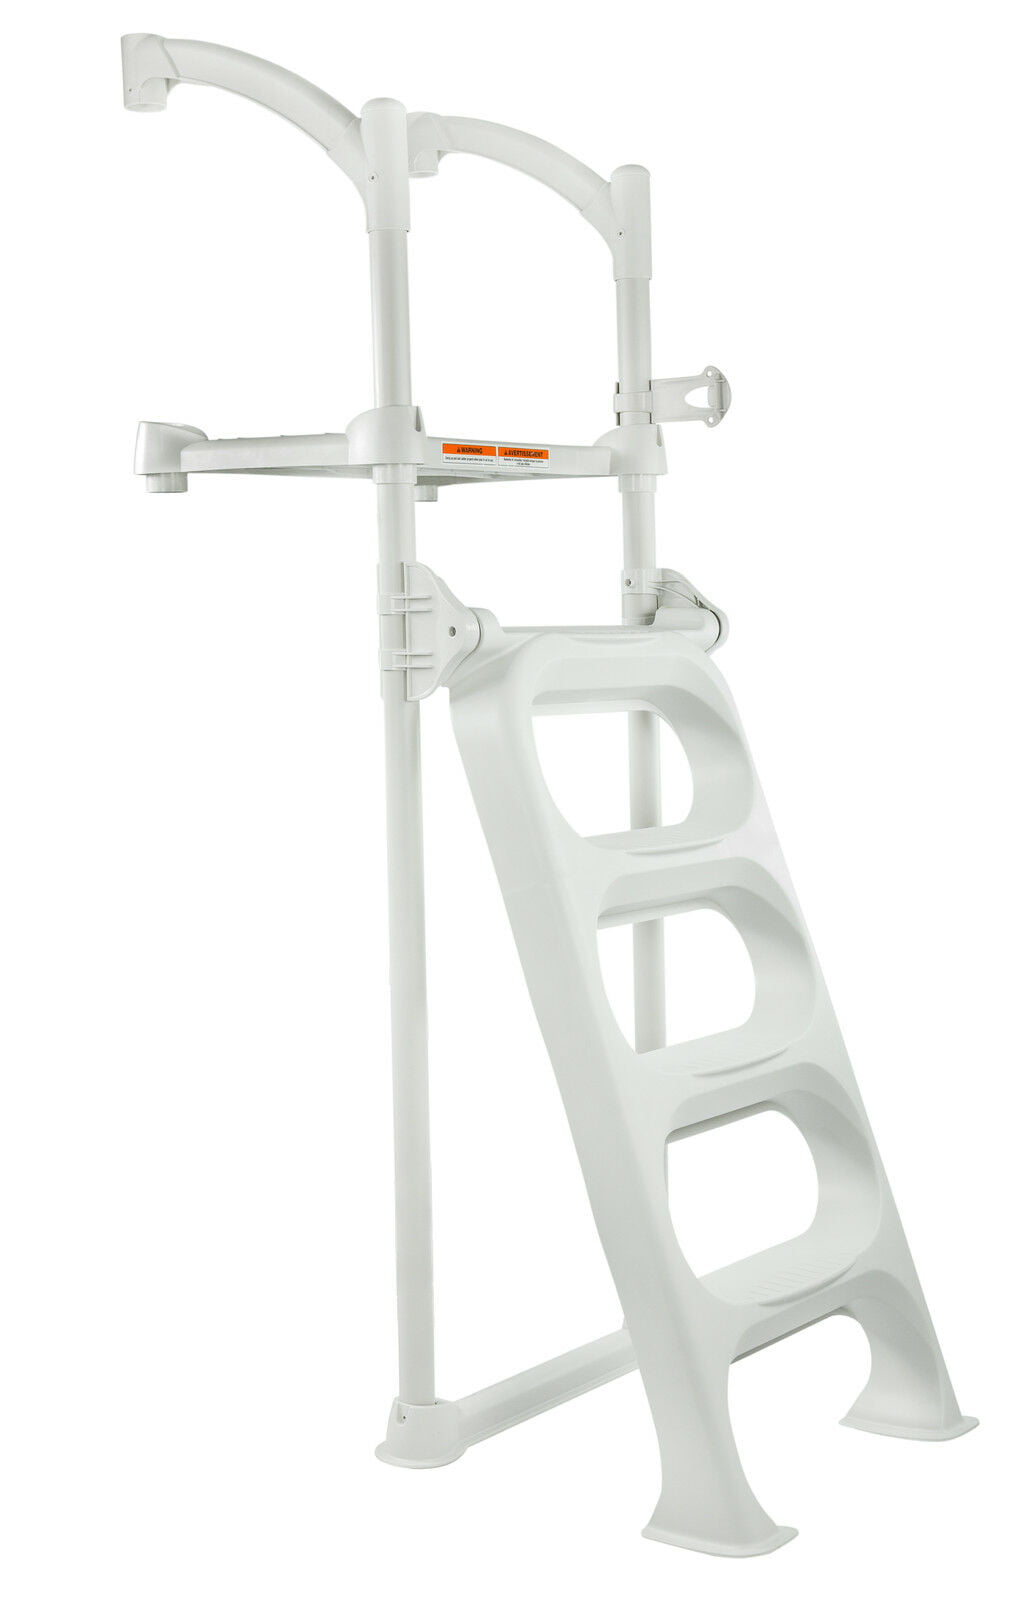 Tidyard Above-Ground Pool Safety Ladder with 3 Steps Non-Slip 48.0 